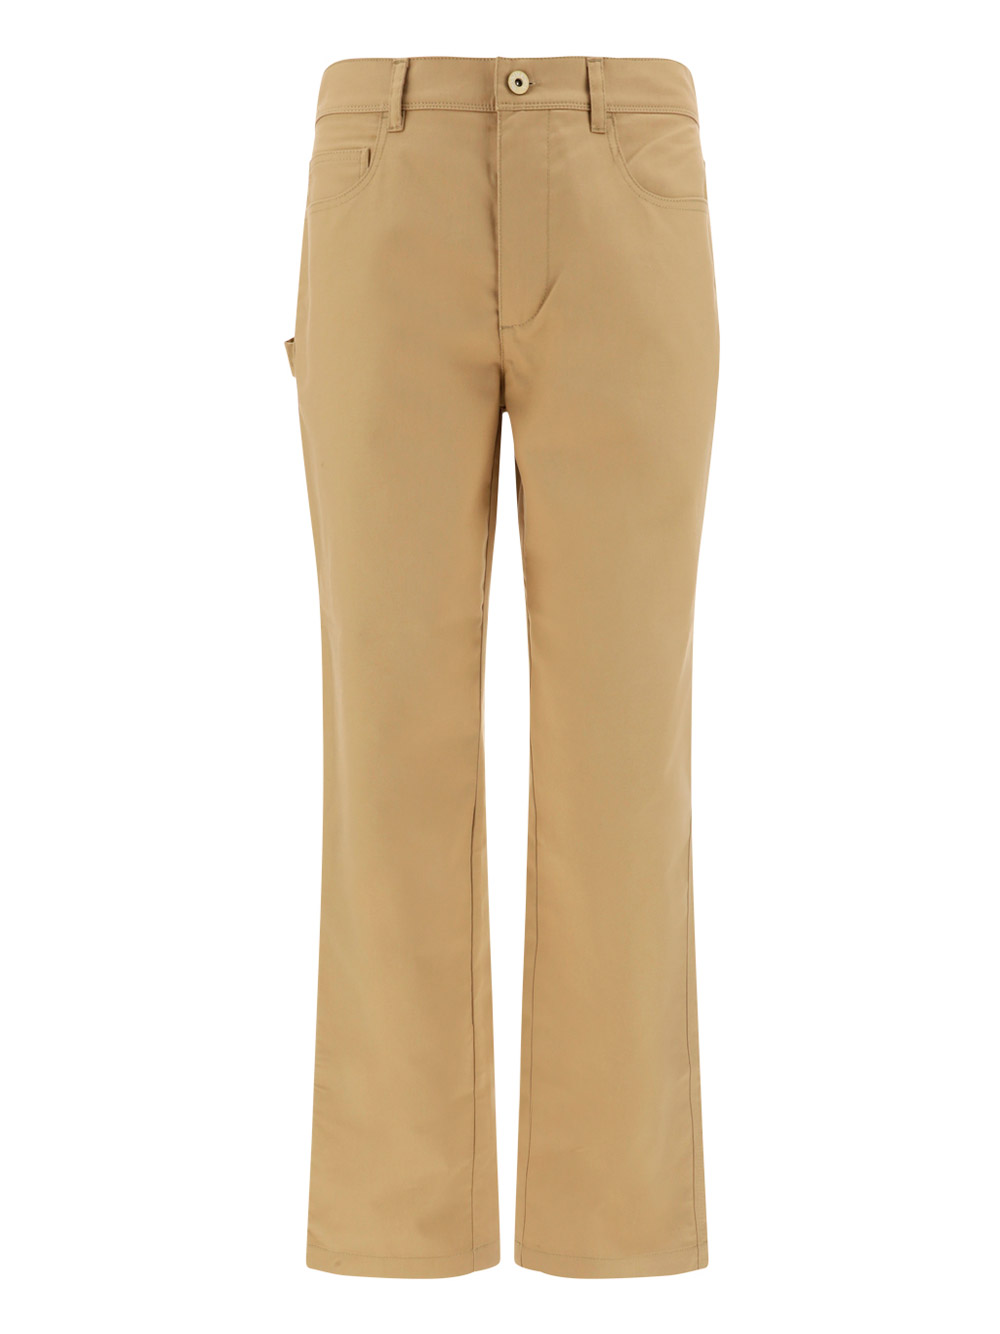 JW Anderson belted cotton trousers